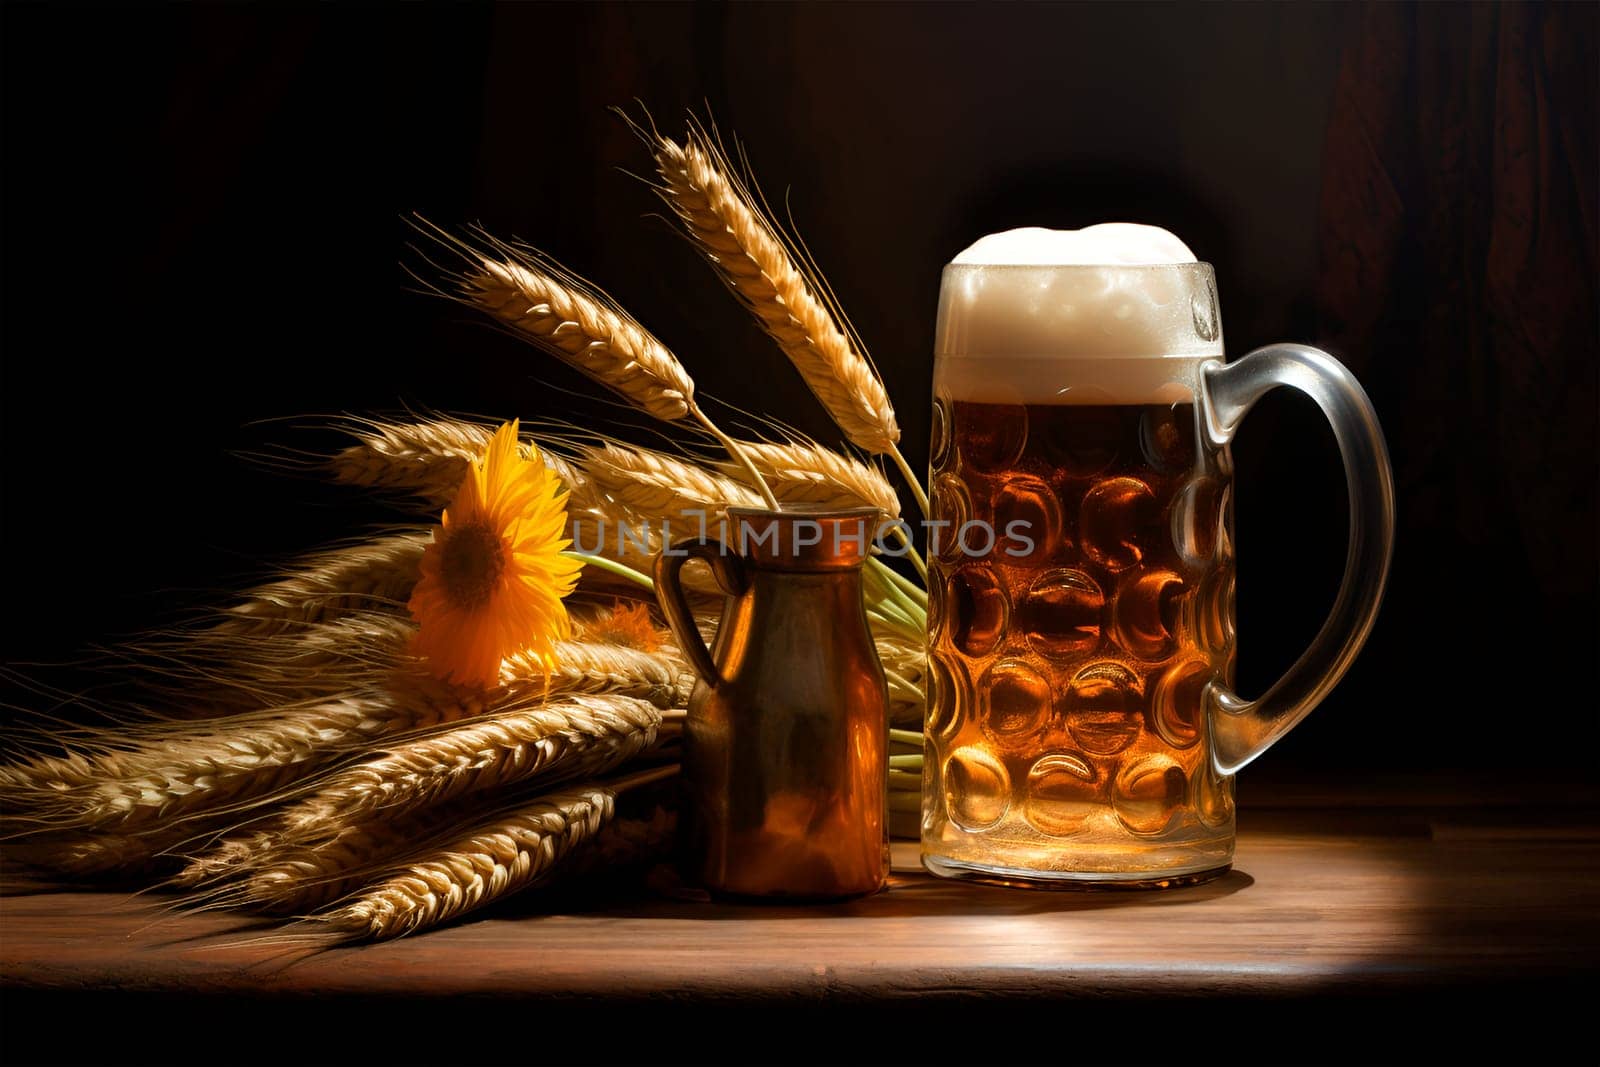 Beer in a jug with wheat and malt on a wooden table. Oktouberfest beer making festival. copy paste your design